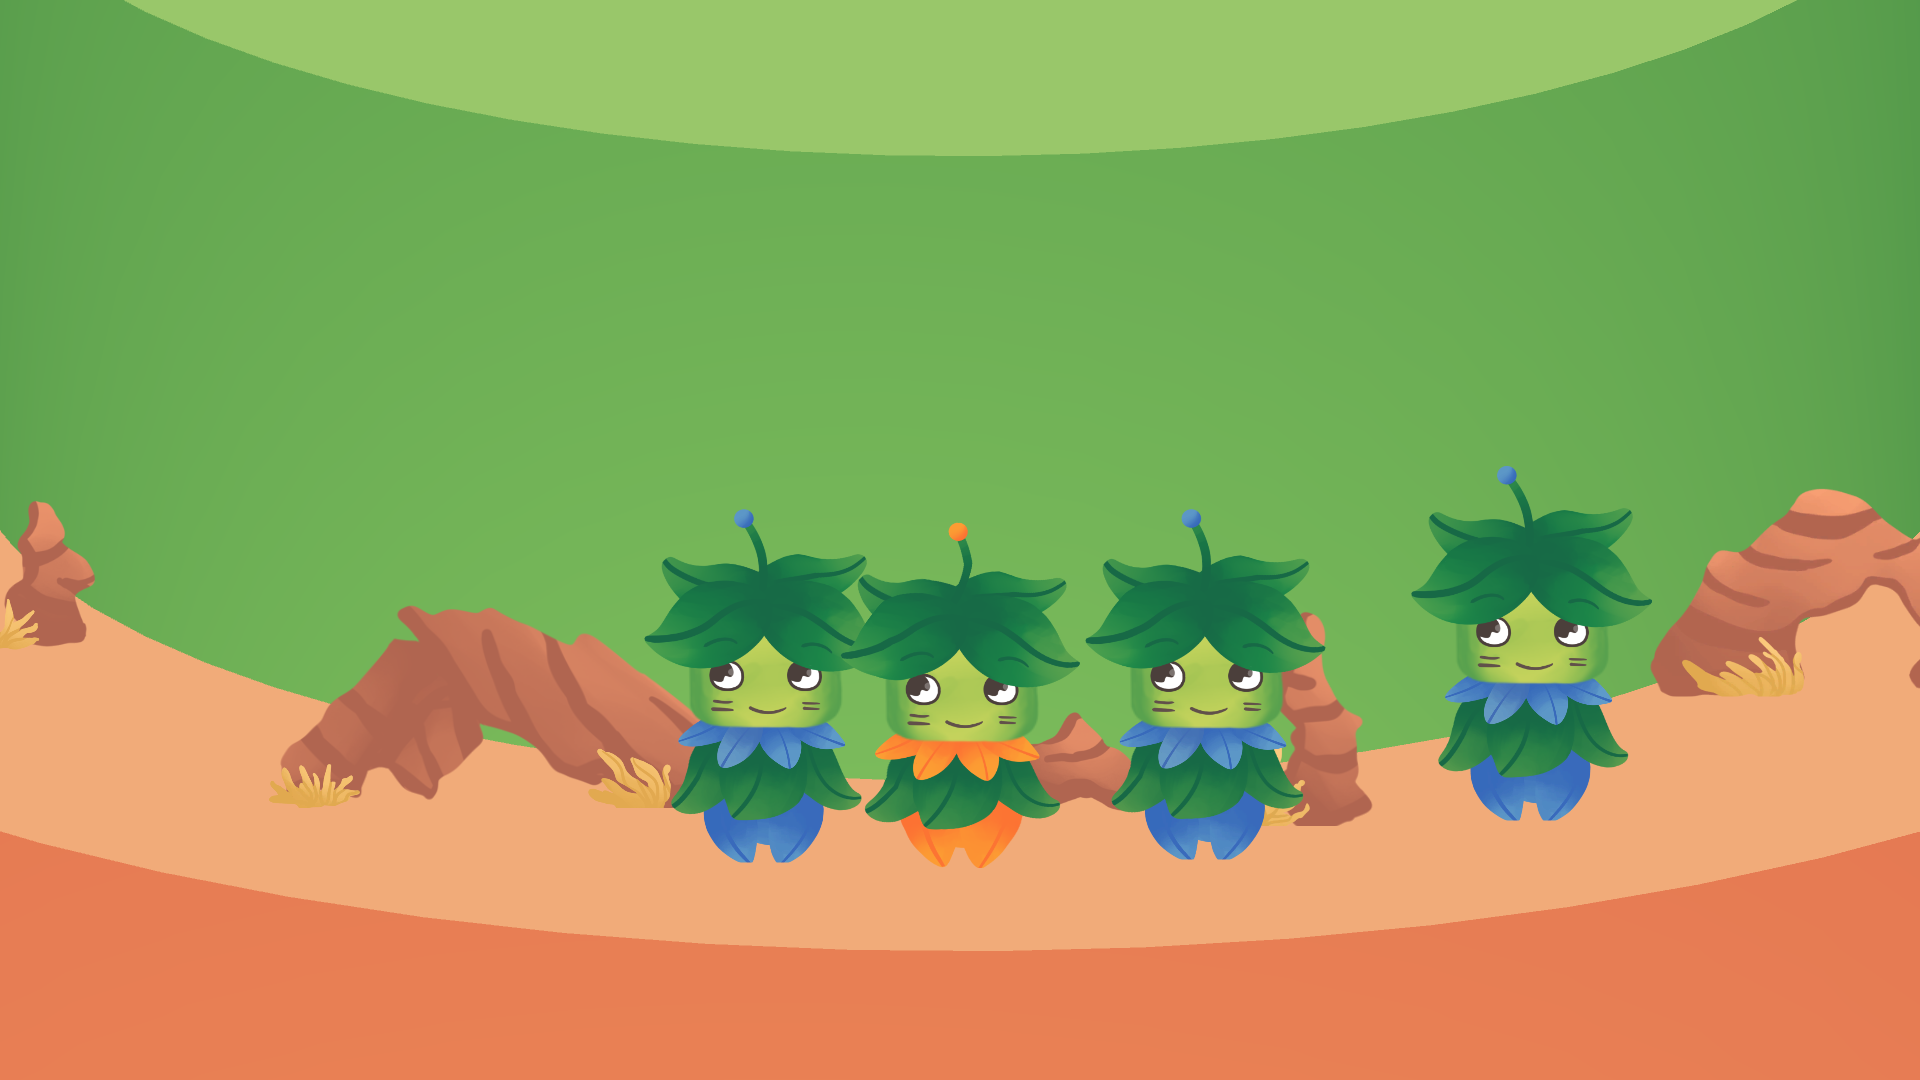 Screenshot of the game SumMit. In the center of the screen is a green and orange character, its hair and dress are made of leaves. It stands on the plateau of a multilevel cylindrical mountain. Around it are three other characters, colored green and blue instead. In the background there are some rocks on the plateau.